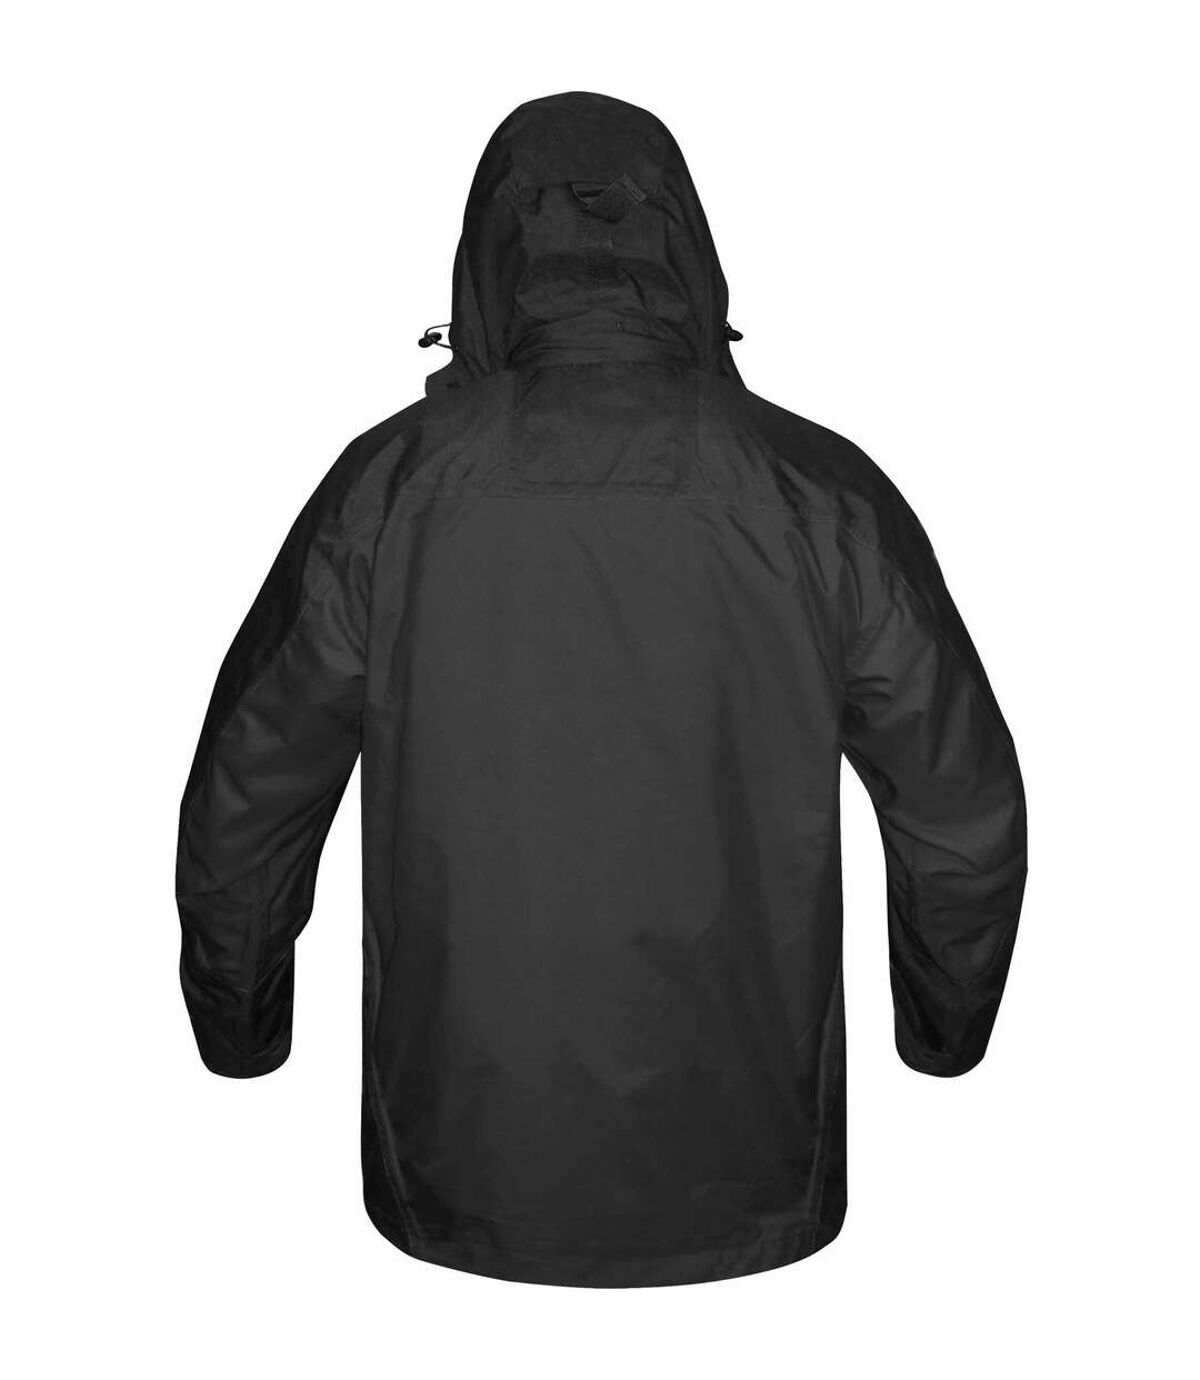 Stormtech Mens Fusion 5 In 1 System Parka Hooded Waterproof Breathable Jacket (Black/Black) - UTBC1185